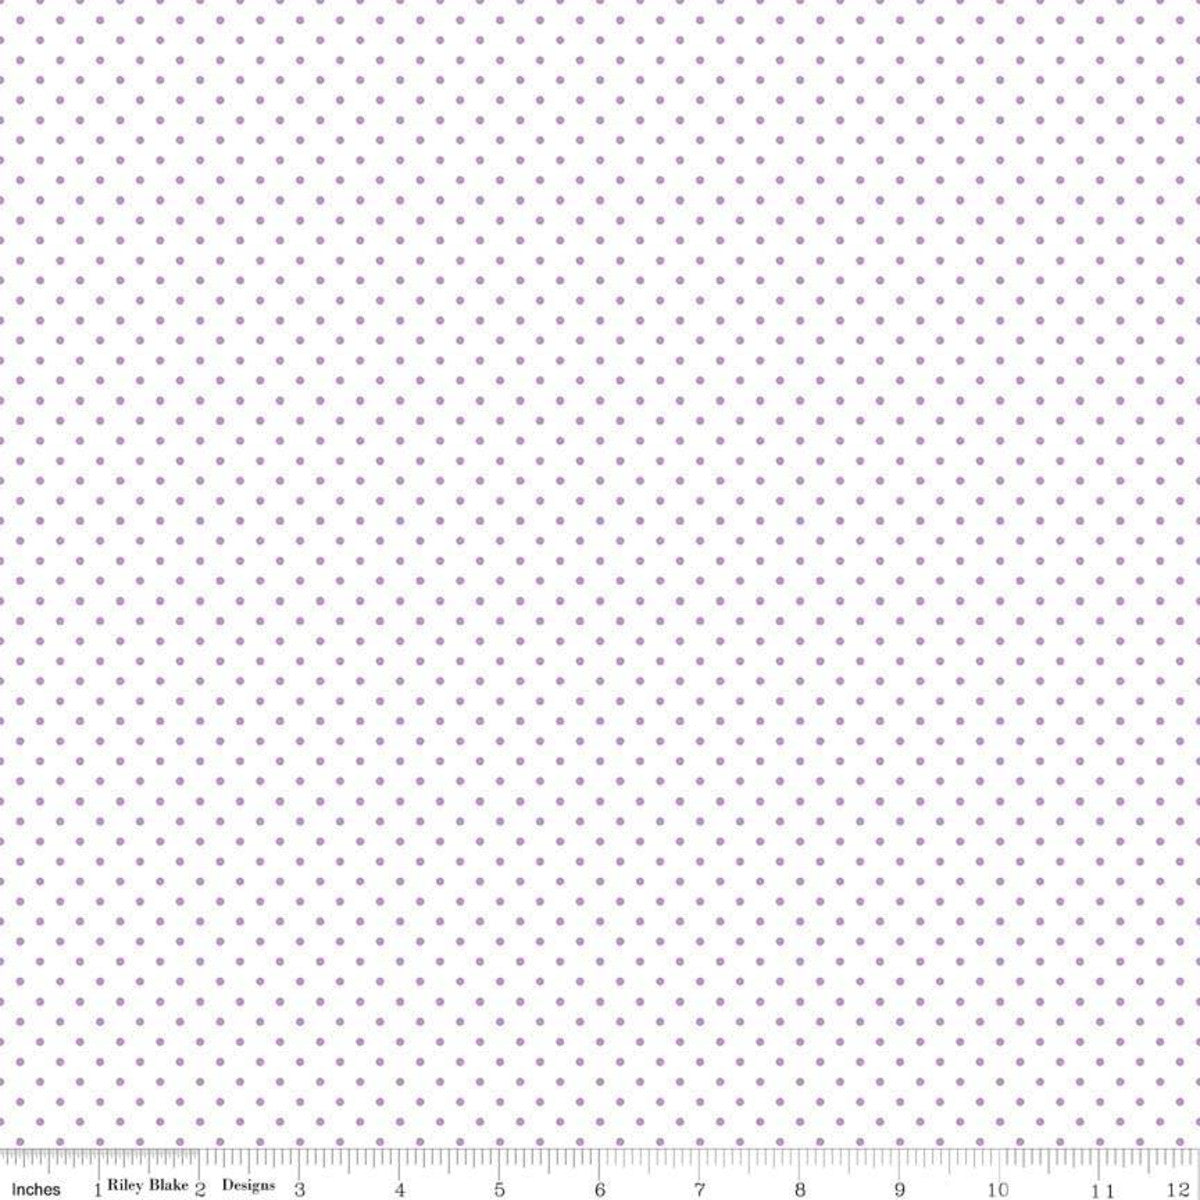 This Riley Blake Designs Basic fabric features small polka dots on a white background every 1/2" along the fabric.  100% cotton  Width: 43"/44"